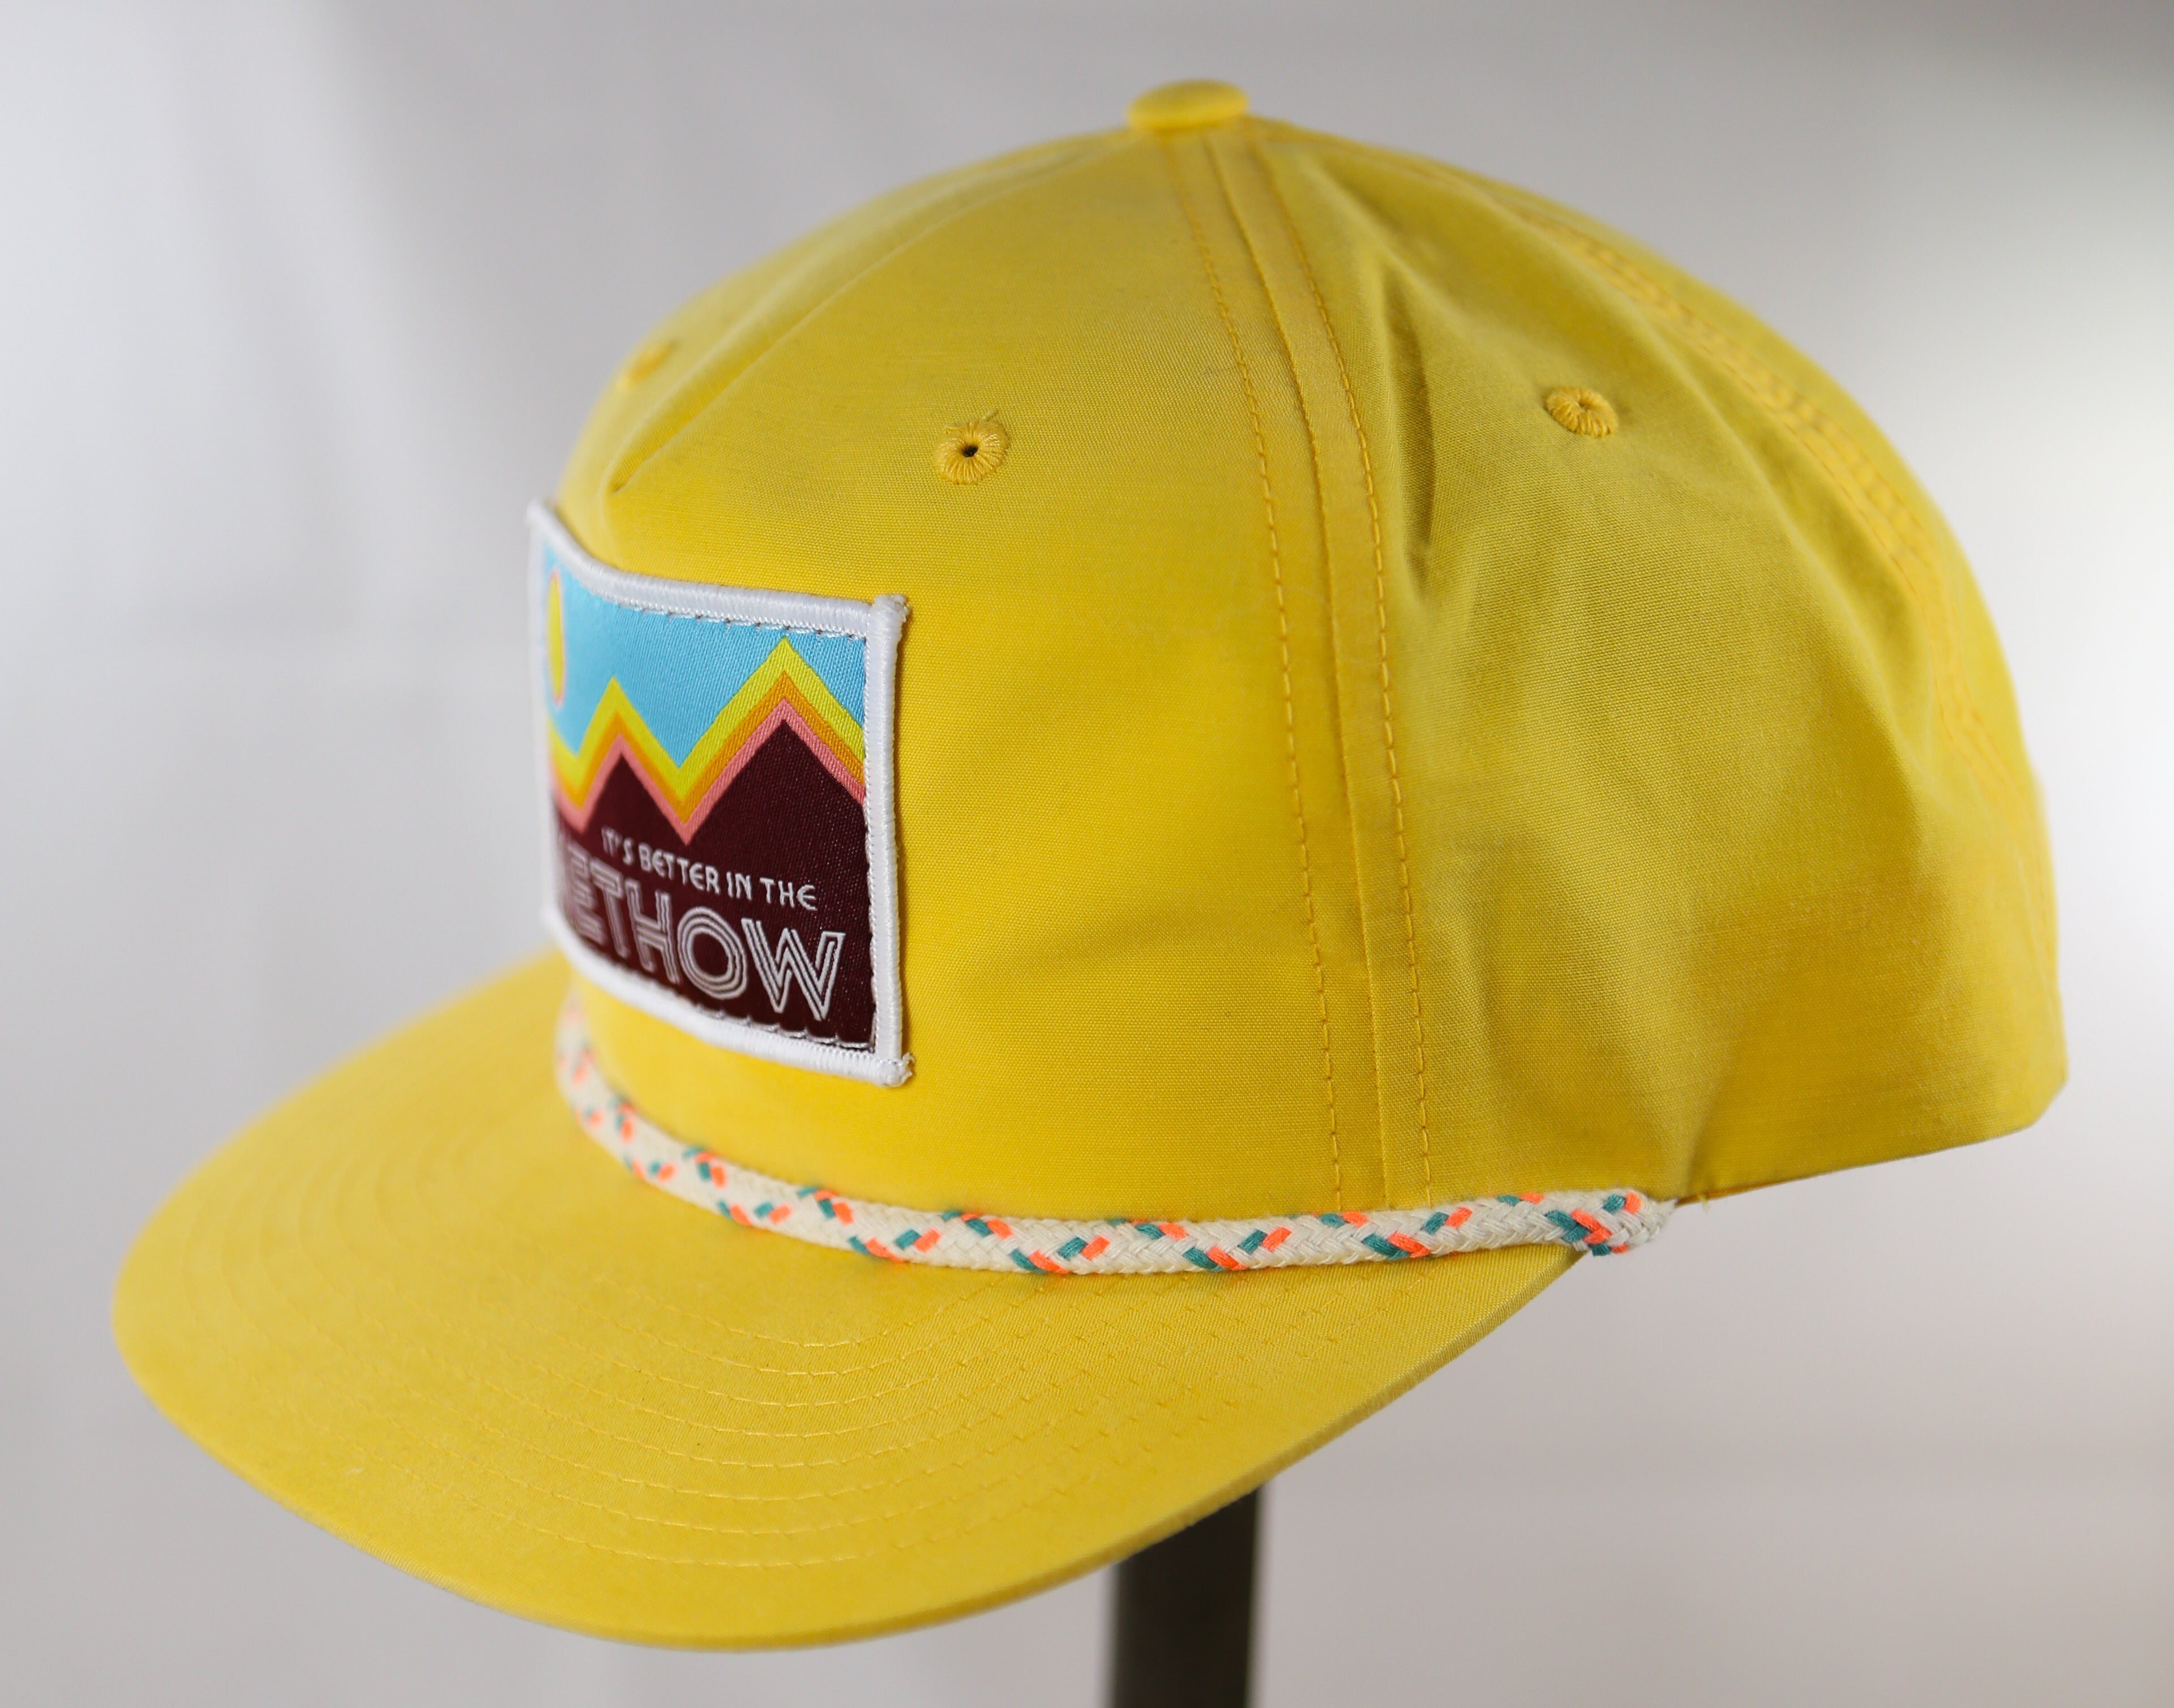 It's Better in the Methow - Gramps Snapback